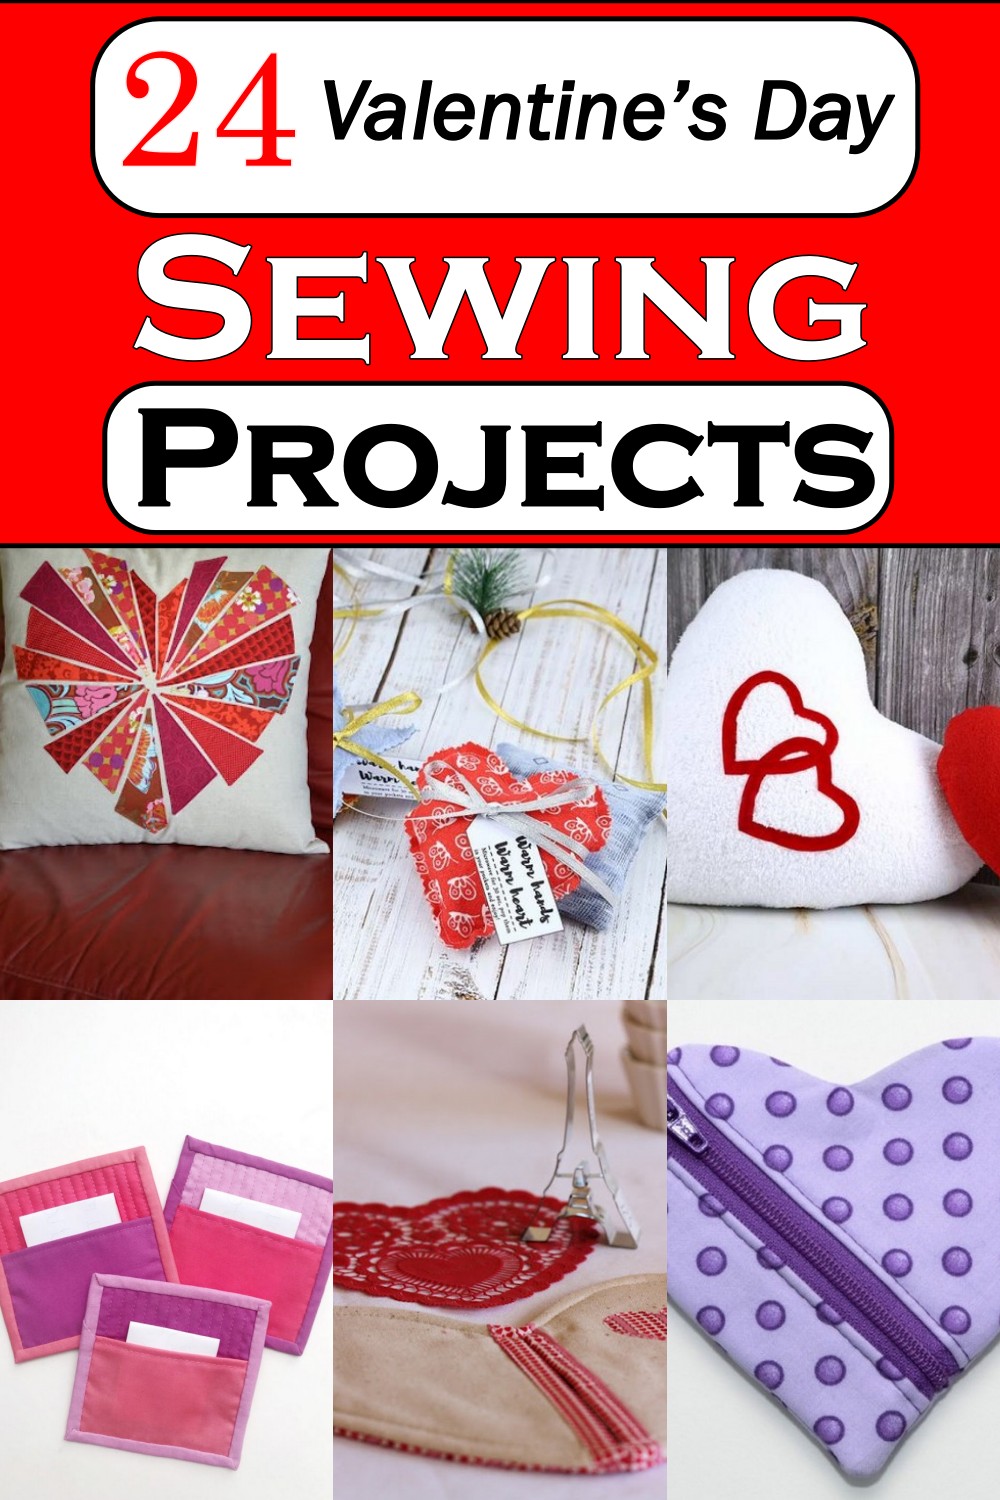 Valentine’s Day Sewing Projects